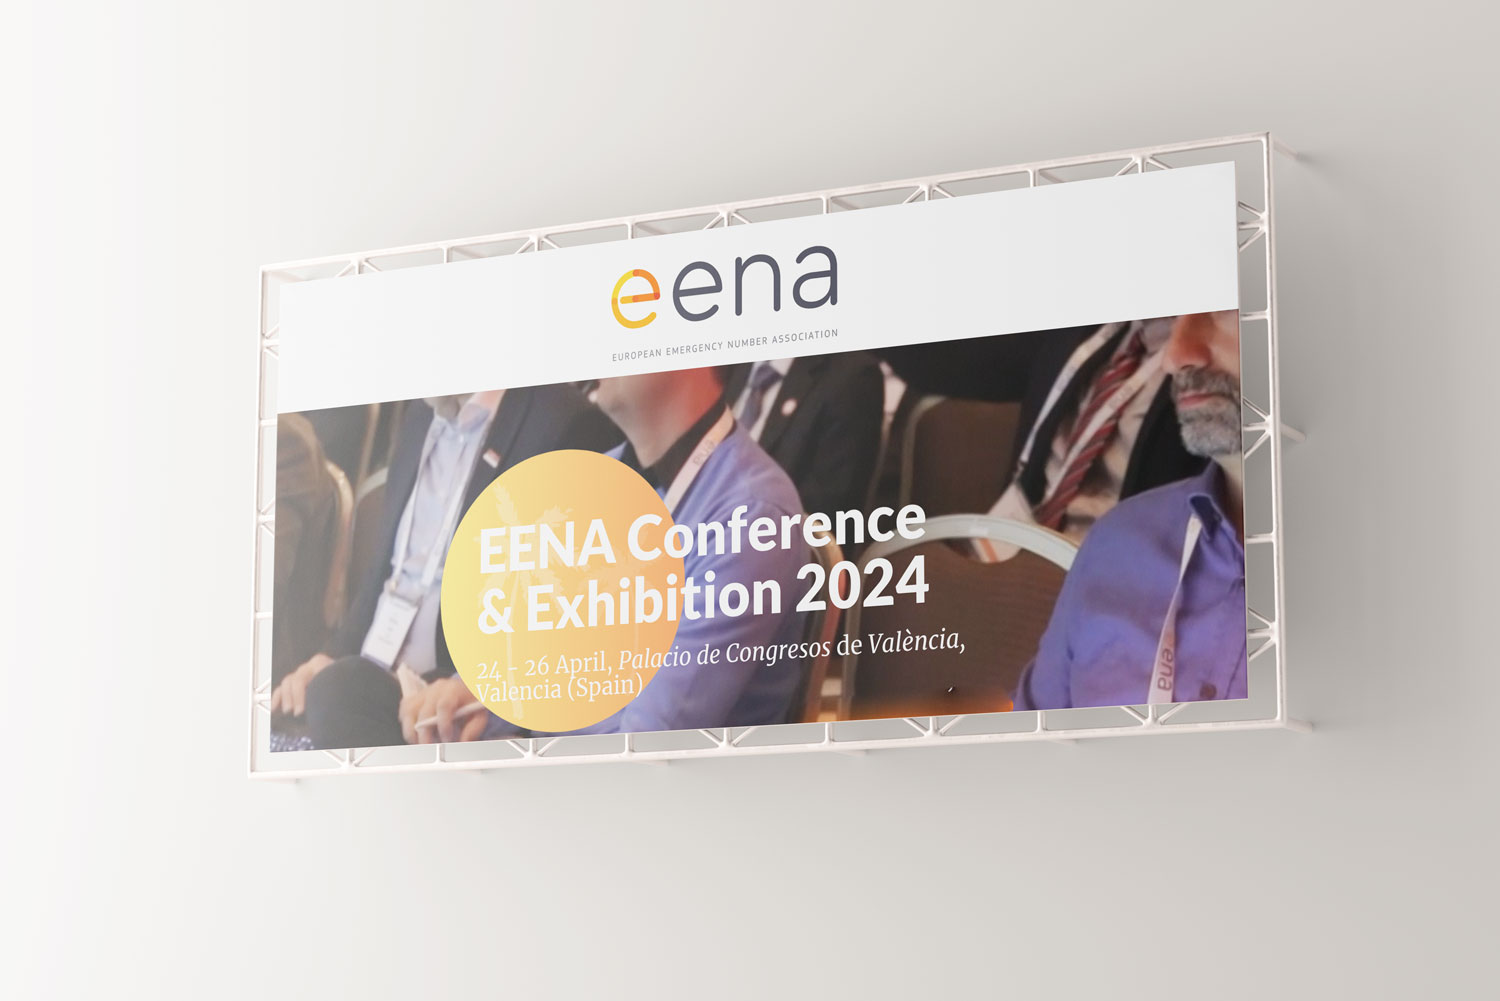 mecom attends EENA Conference in Valencia (Spain)